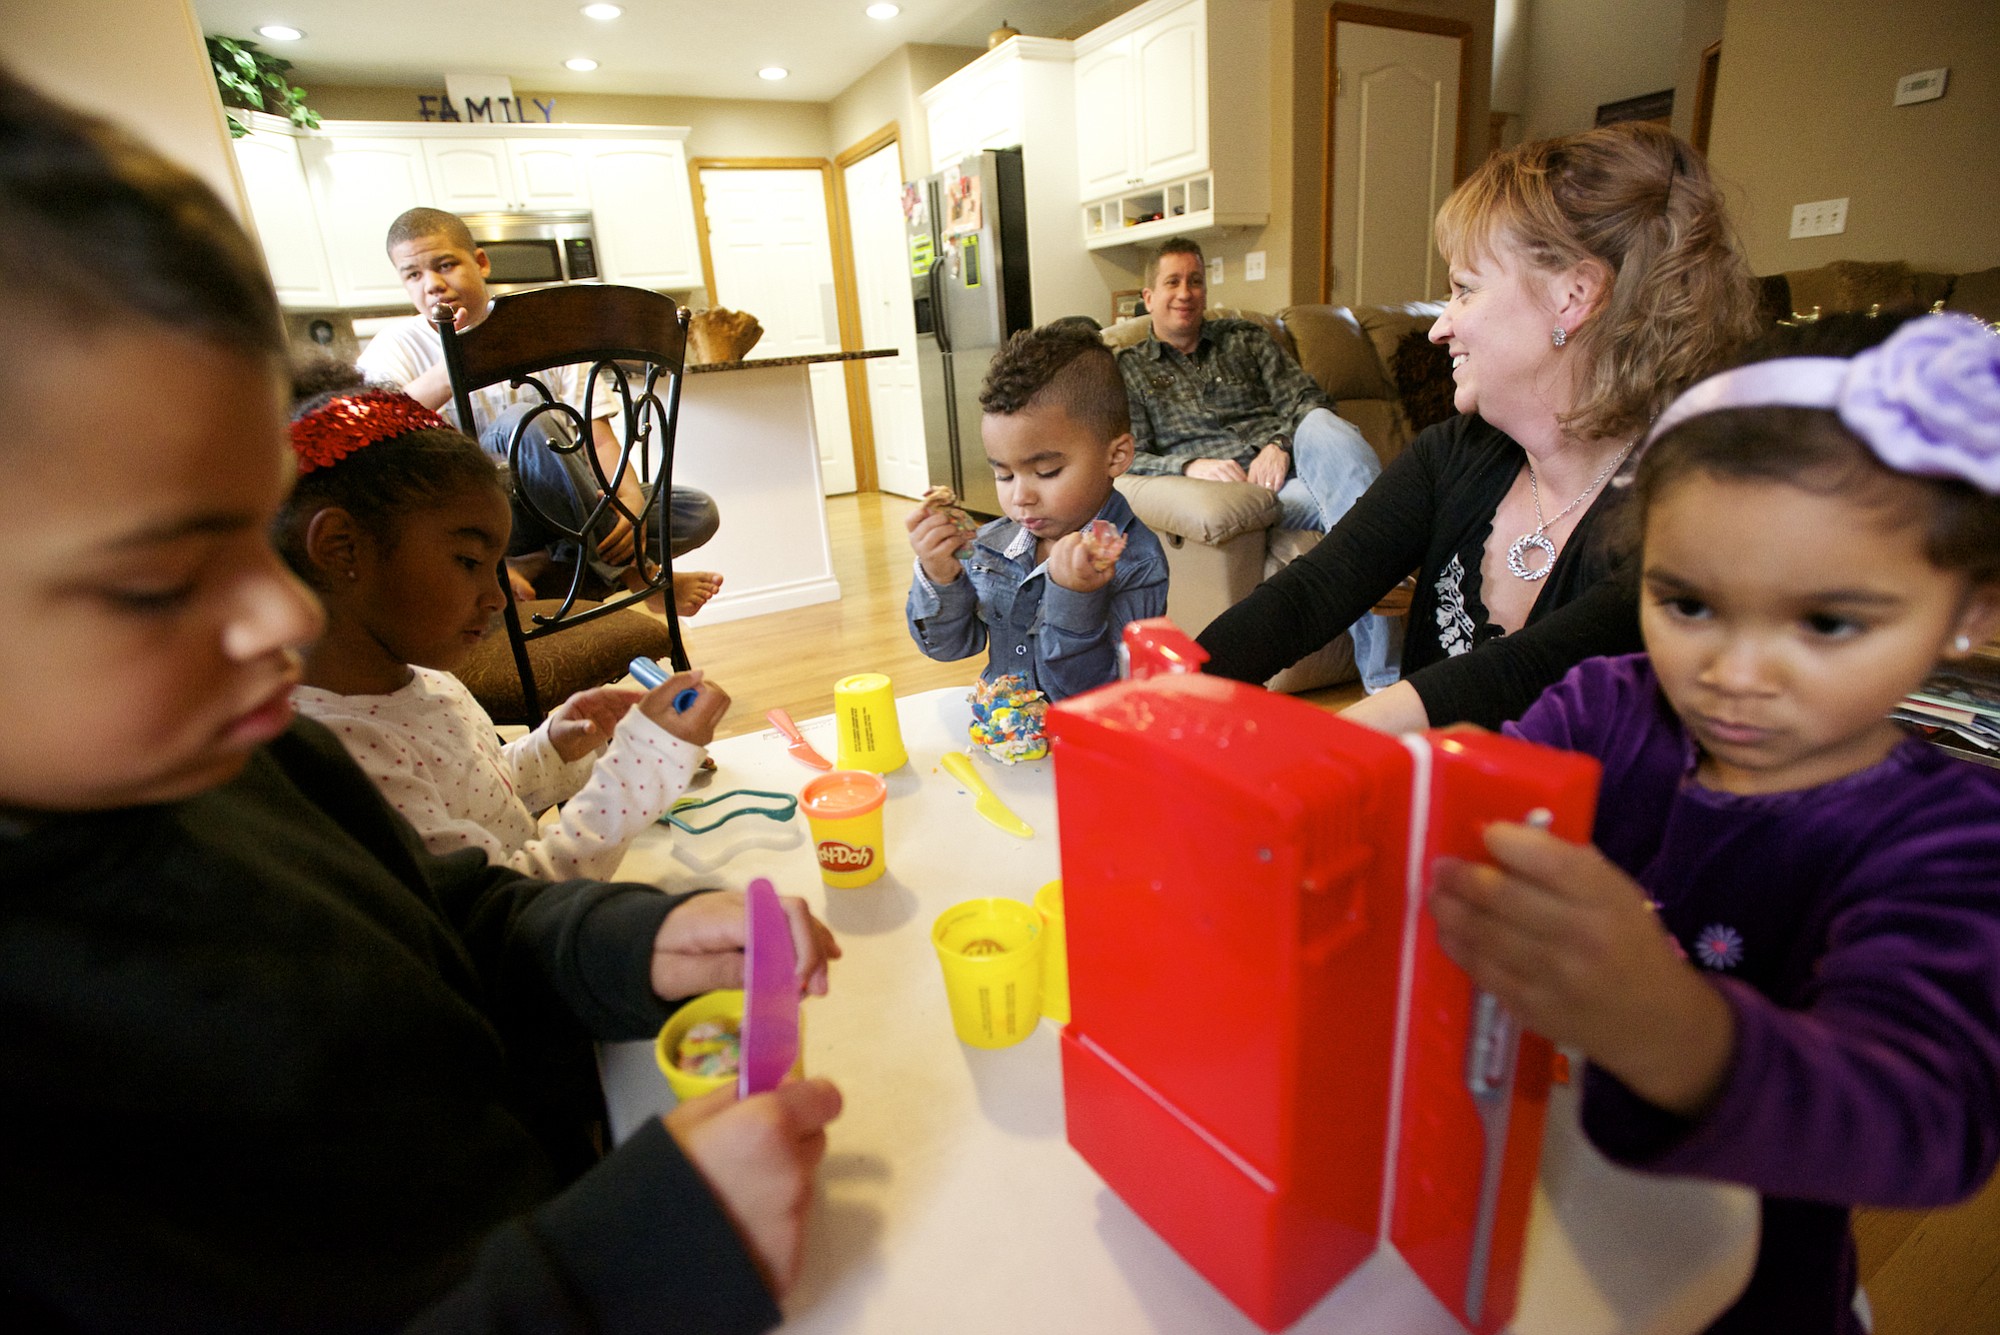 Gary and Michelle Fowler spend time with their five adopted children, from left, Jeramiah, 8; Cortana, 5; Daniel, 15; Elijah, 3; and Kara, 4. &quot;For a whole year we didn't get any sleep,&quot; Gary Fowler said.